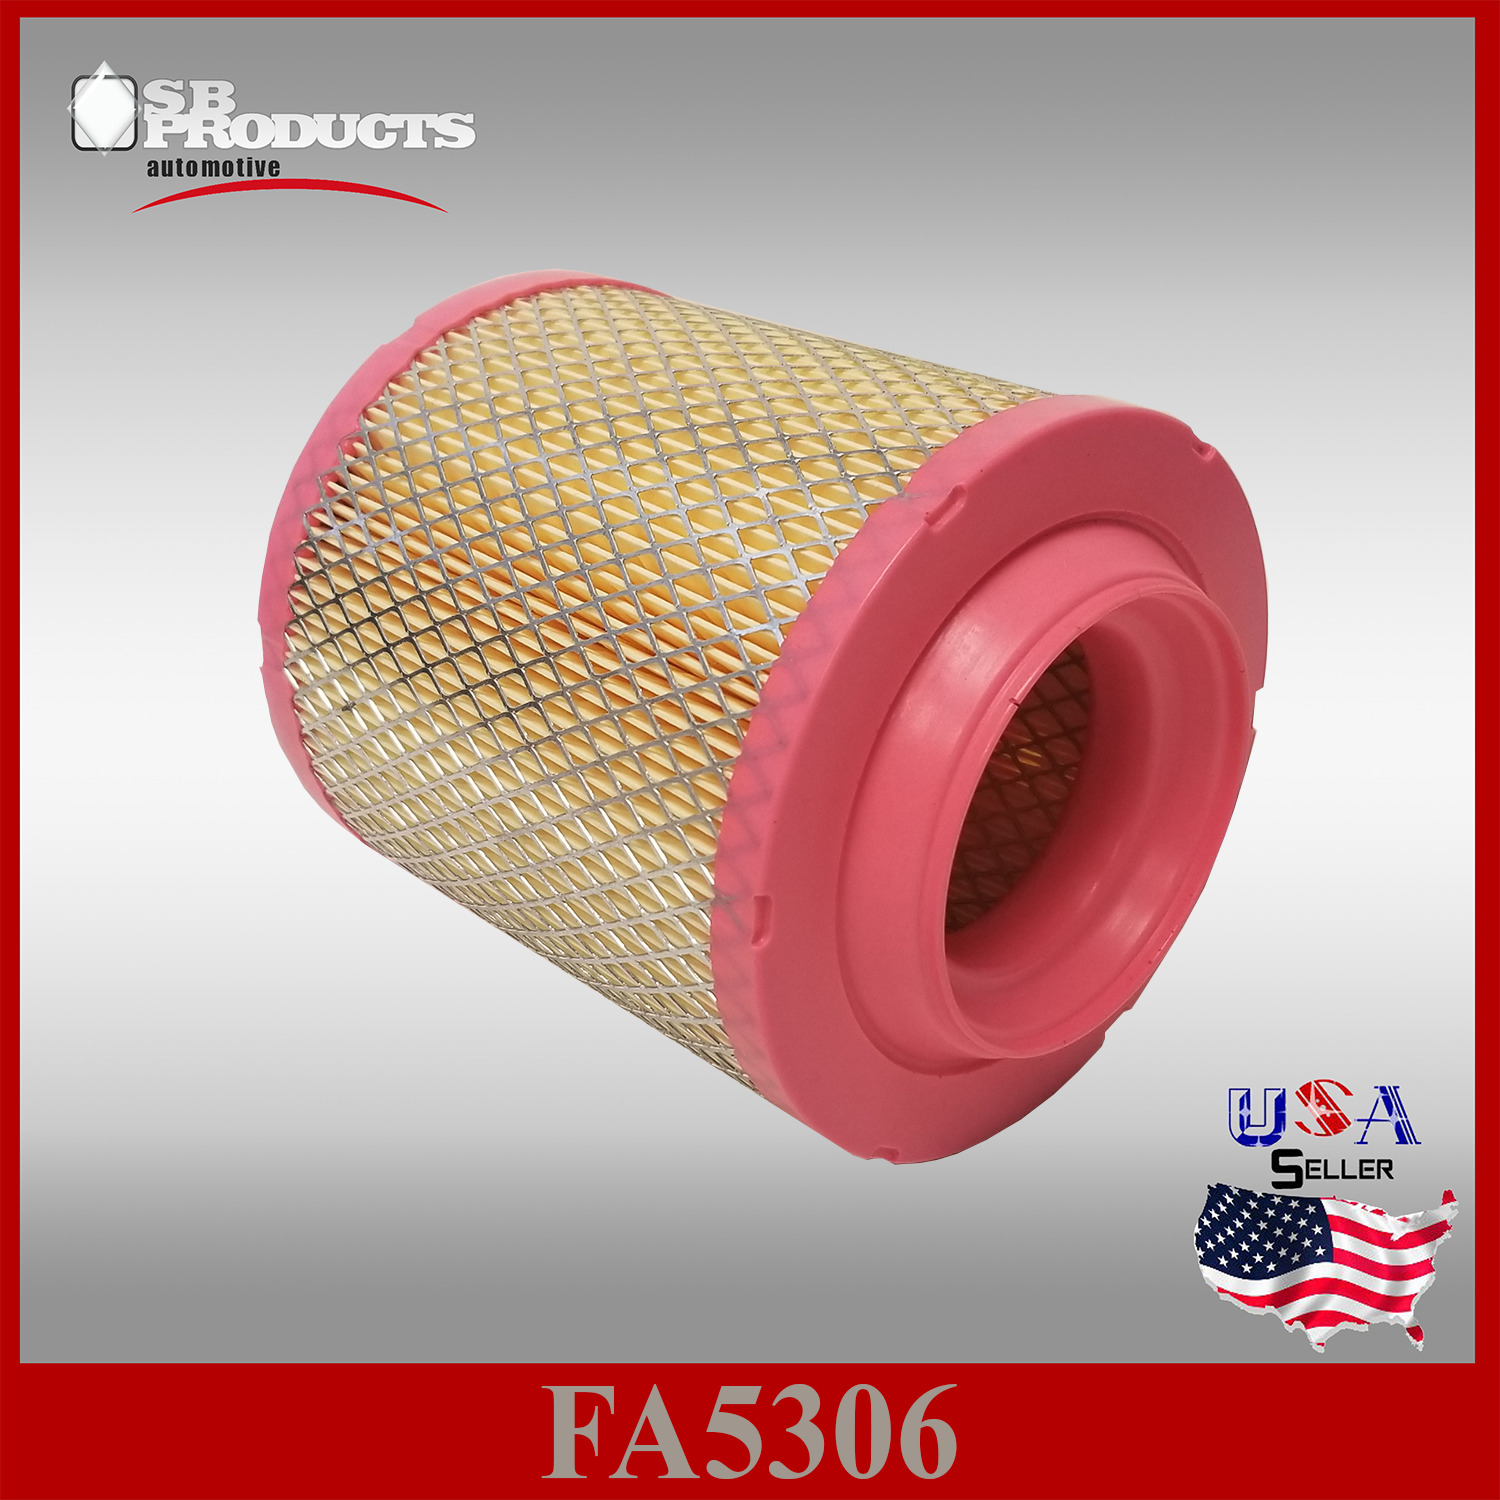 FA5306 A25306 42384 ENGINE AIR FILTER ~ DODGE NEON 2.0L ENGINE 2000 - 2005